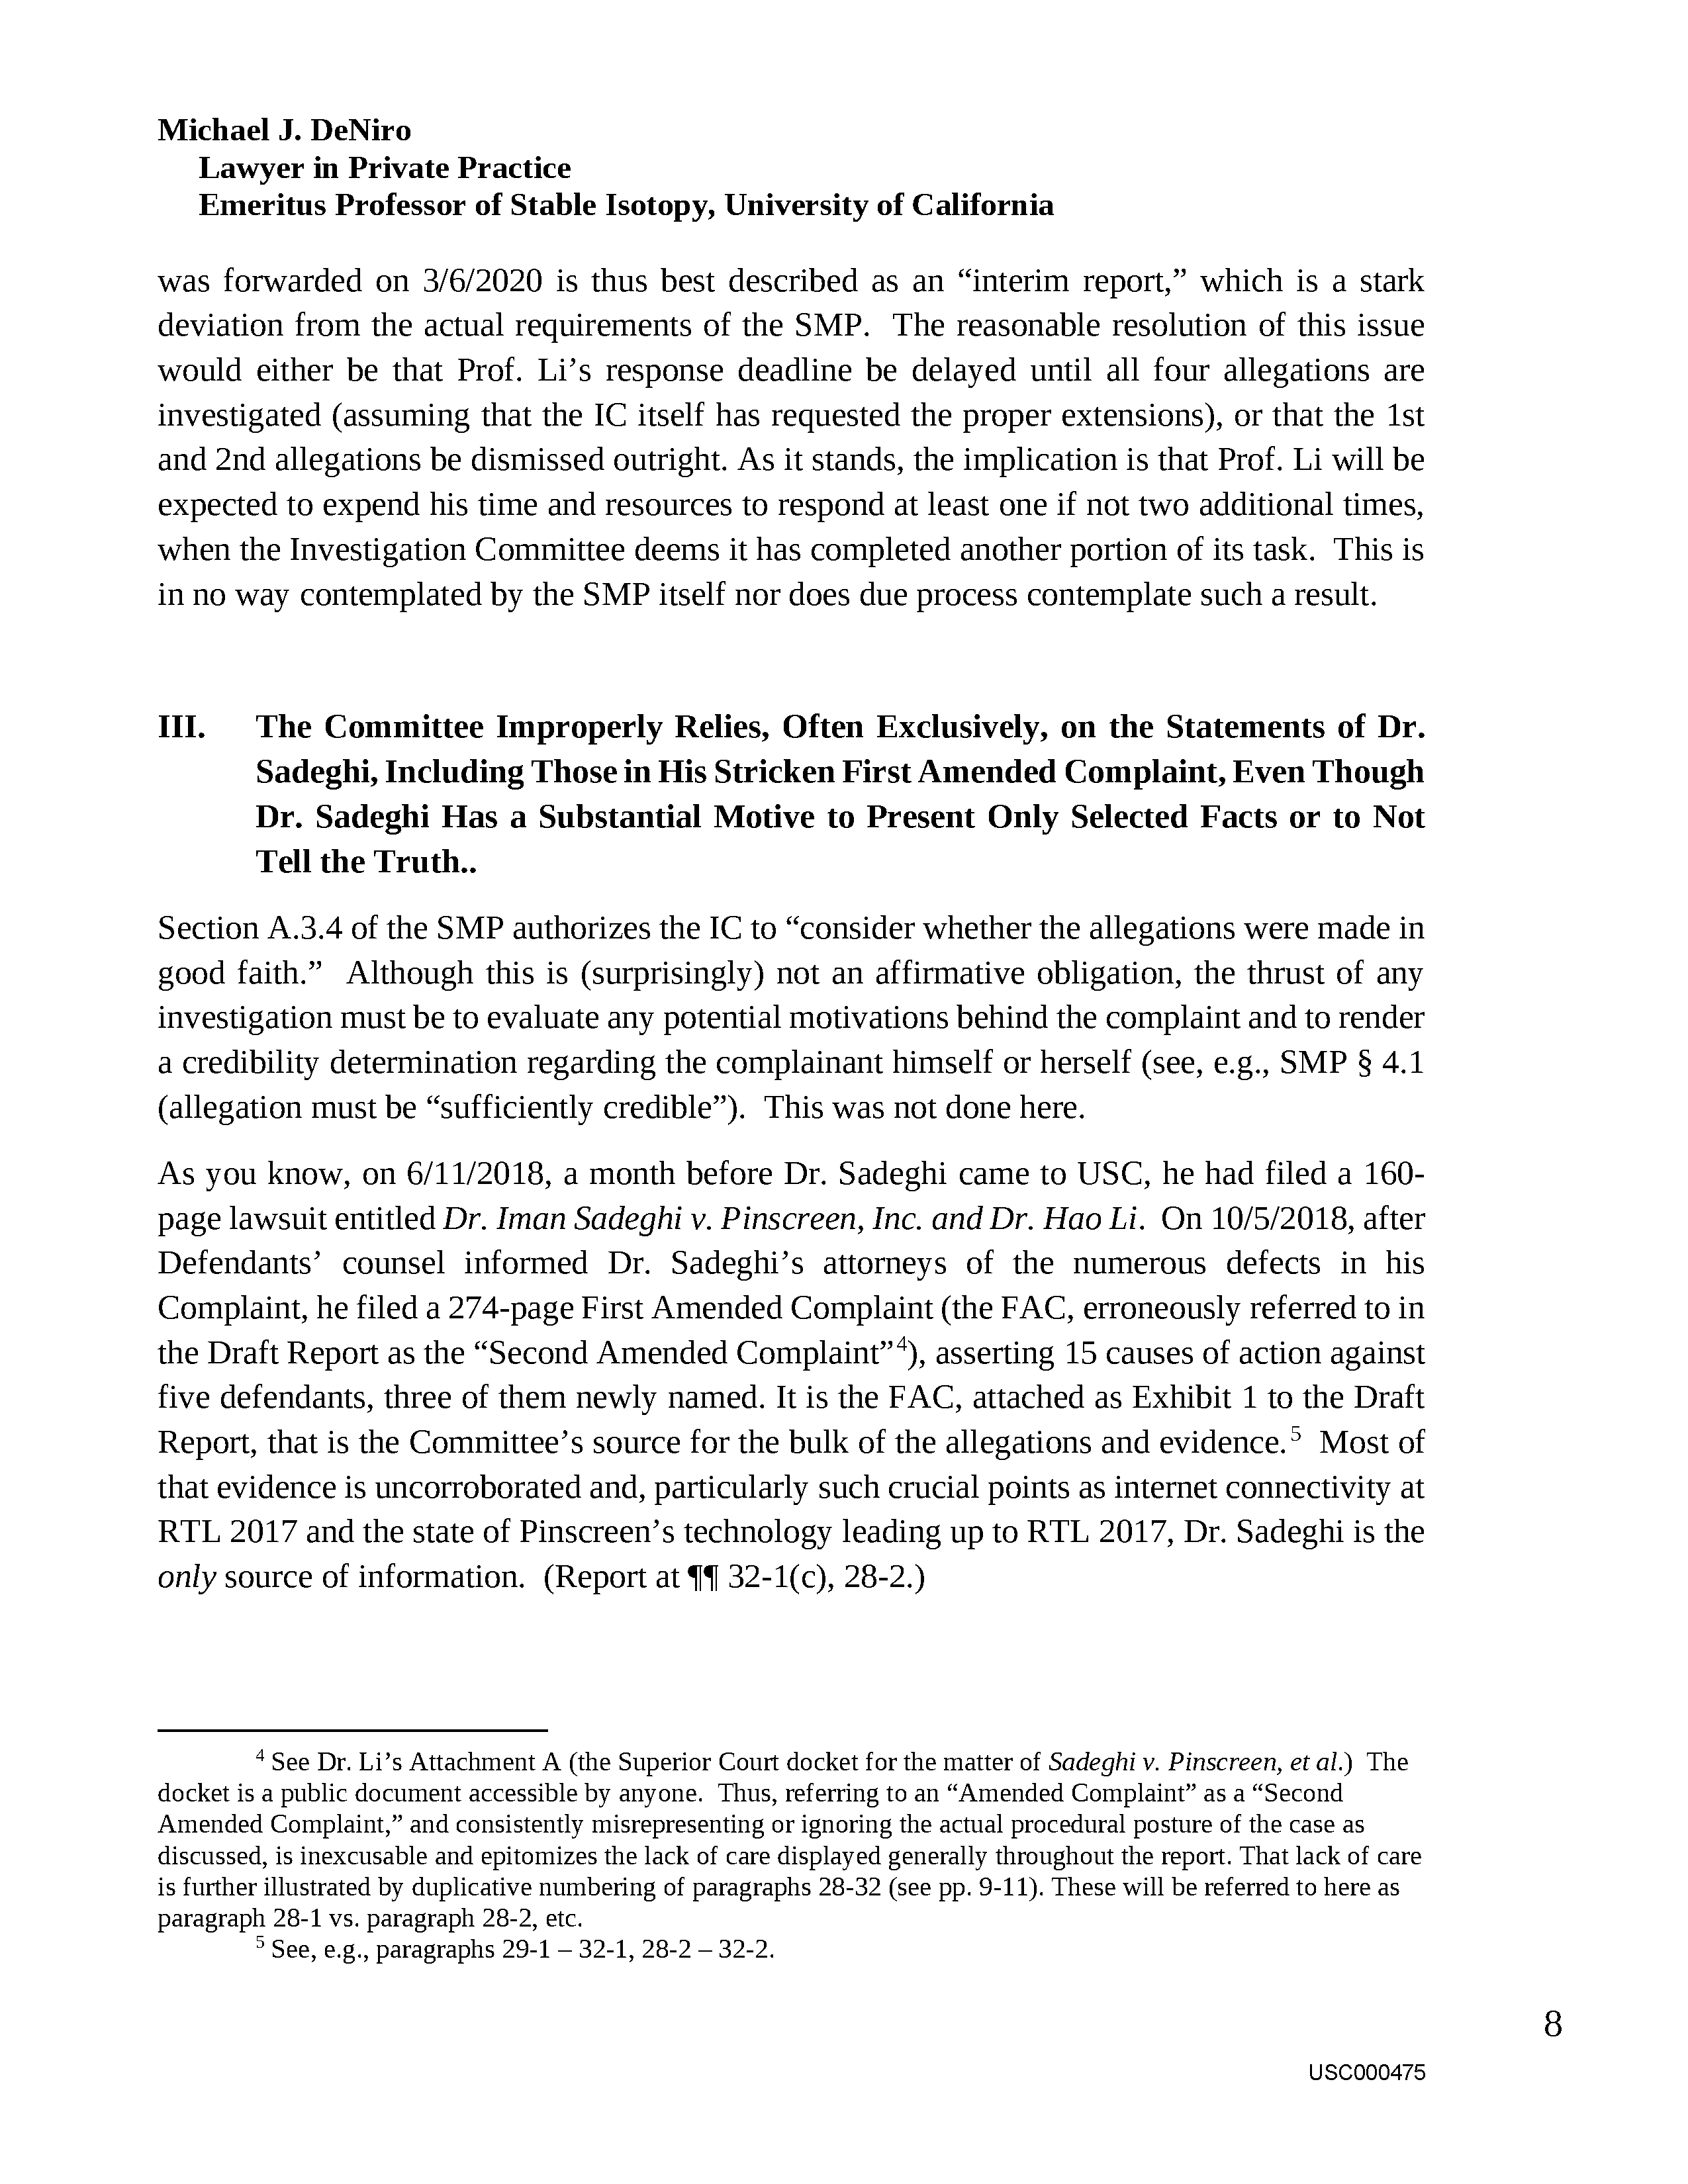 USC's Investigation Report re Hao Li's and Pinscreen's Scientific Misconduct at ACM SIGGRAPH RTL 2017 Page 477